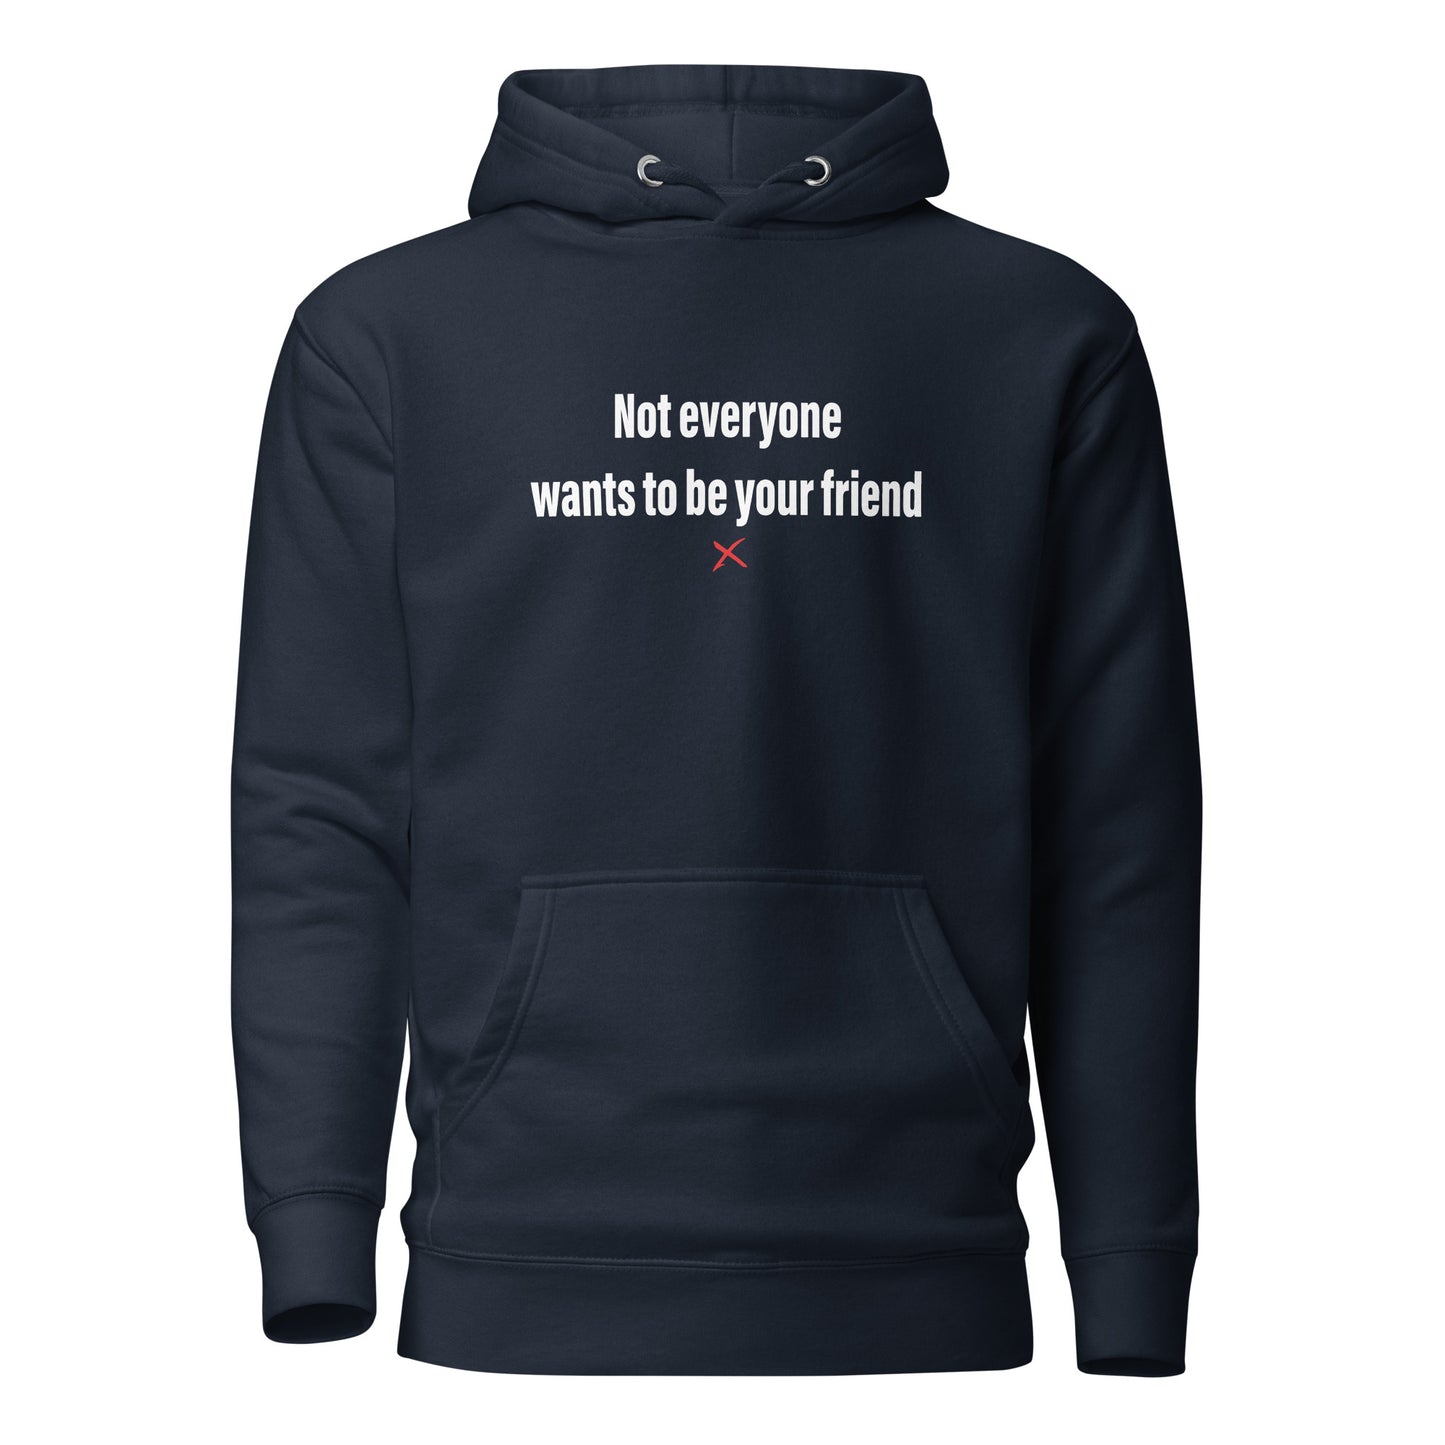 Not everyone wants to be your friend - Hoodie